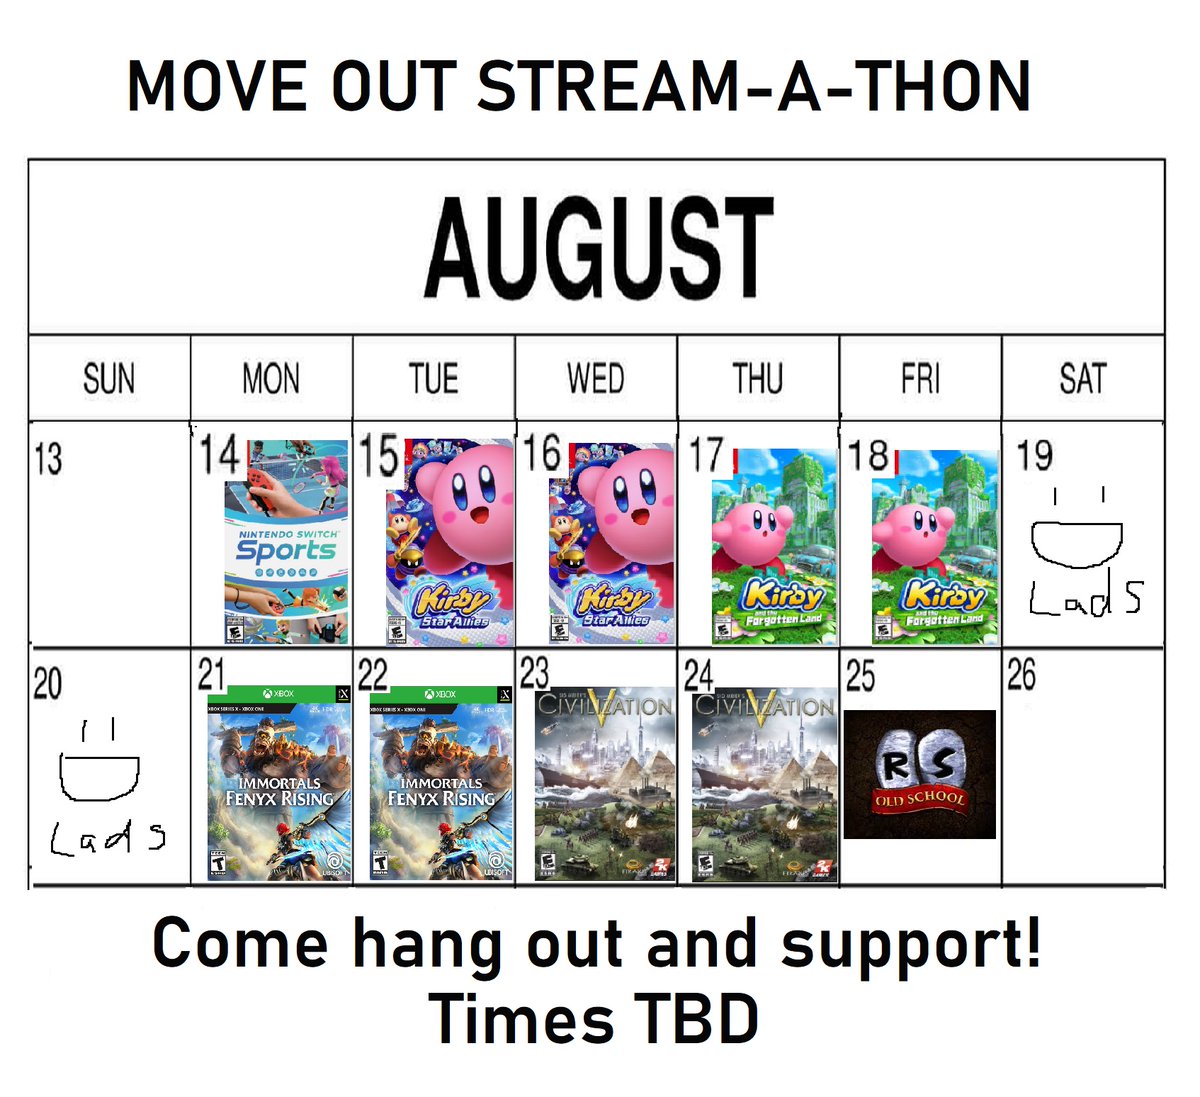 Hey everyone! Big stuff!!
At the end of August I will be doing a big boy move out! And in the time in between I will be streaming a bunch of video games, so please come and hang out! Any forms of support are always greatly appreciated!
#twitch #bigboyshit